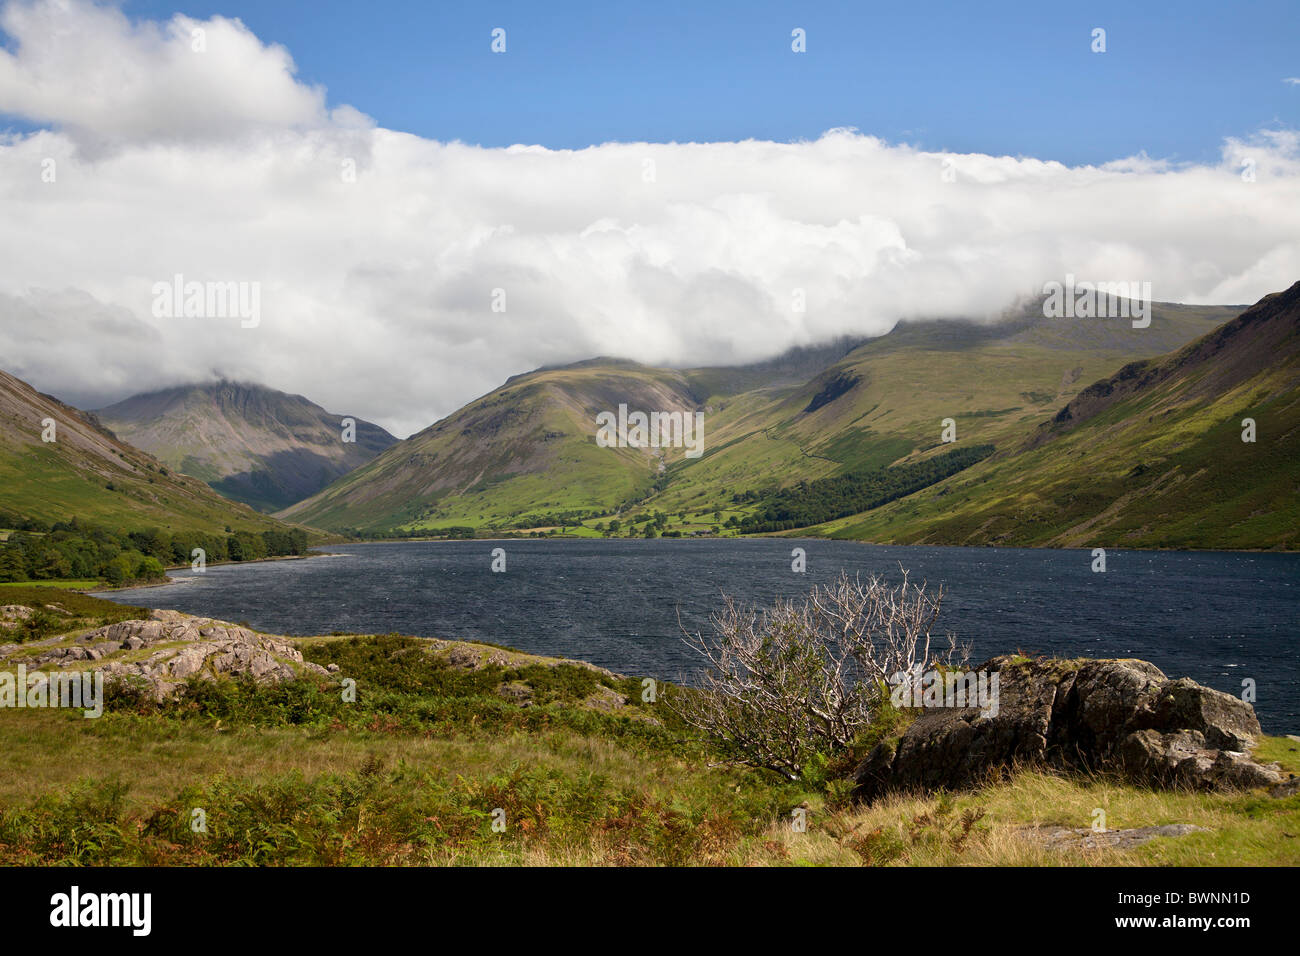 View over Wast water to Scaffell, Cumbria. Stock Photo